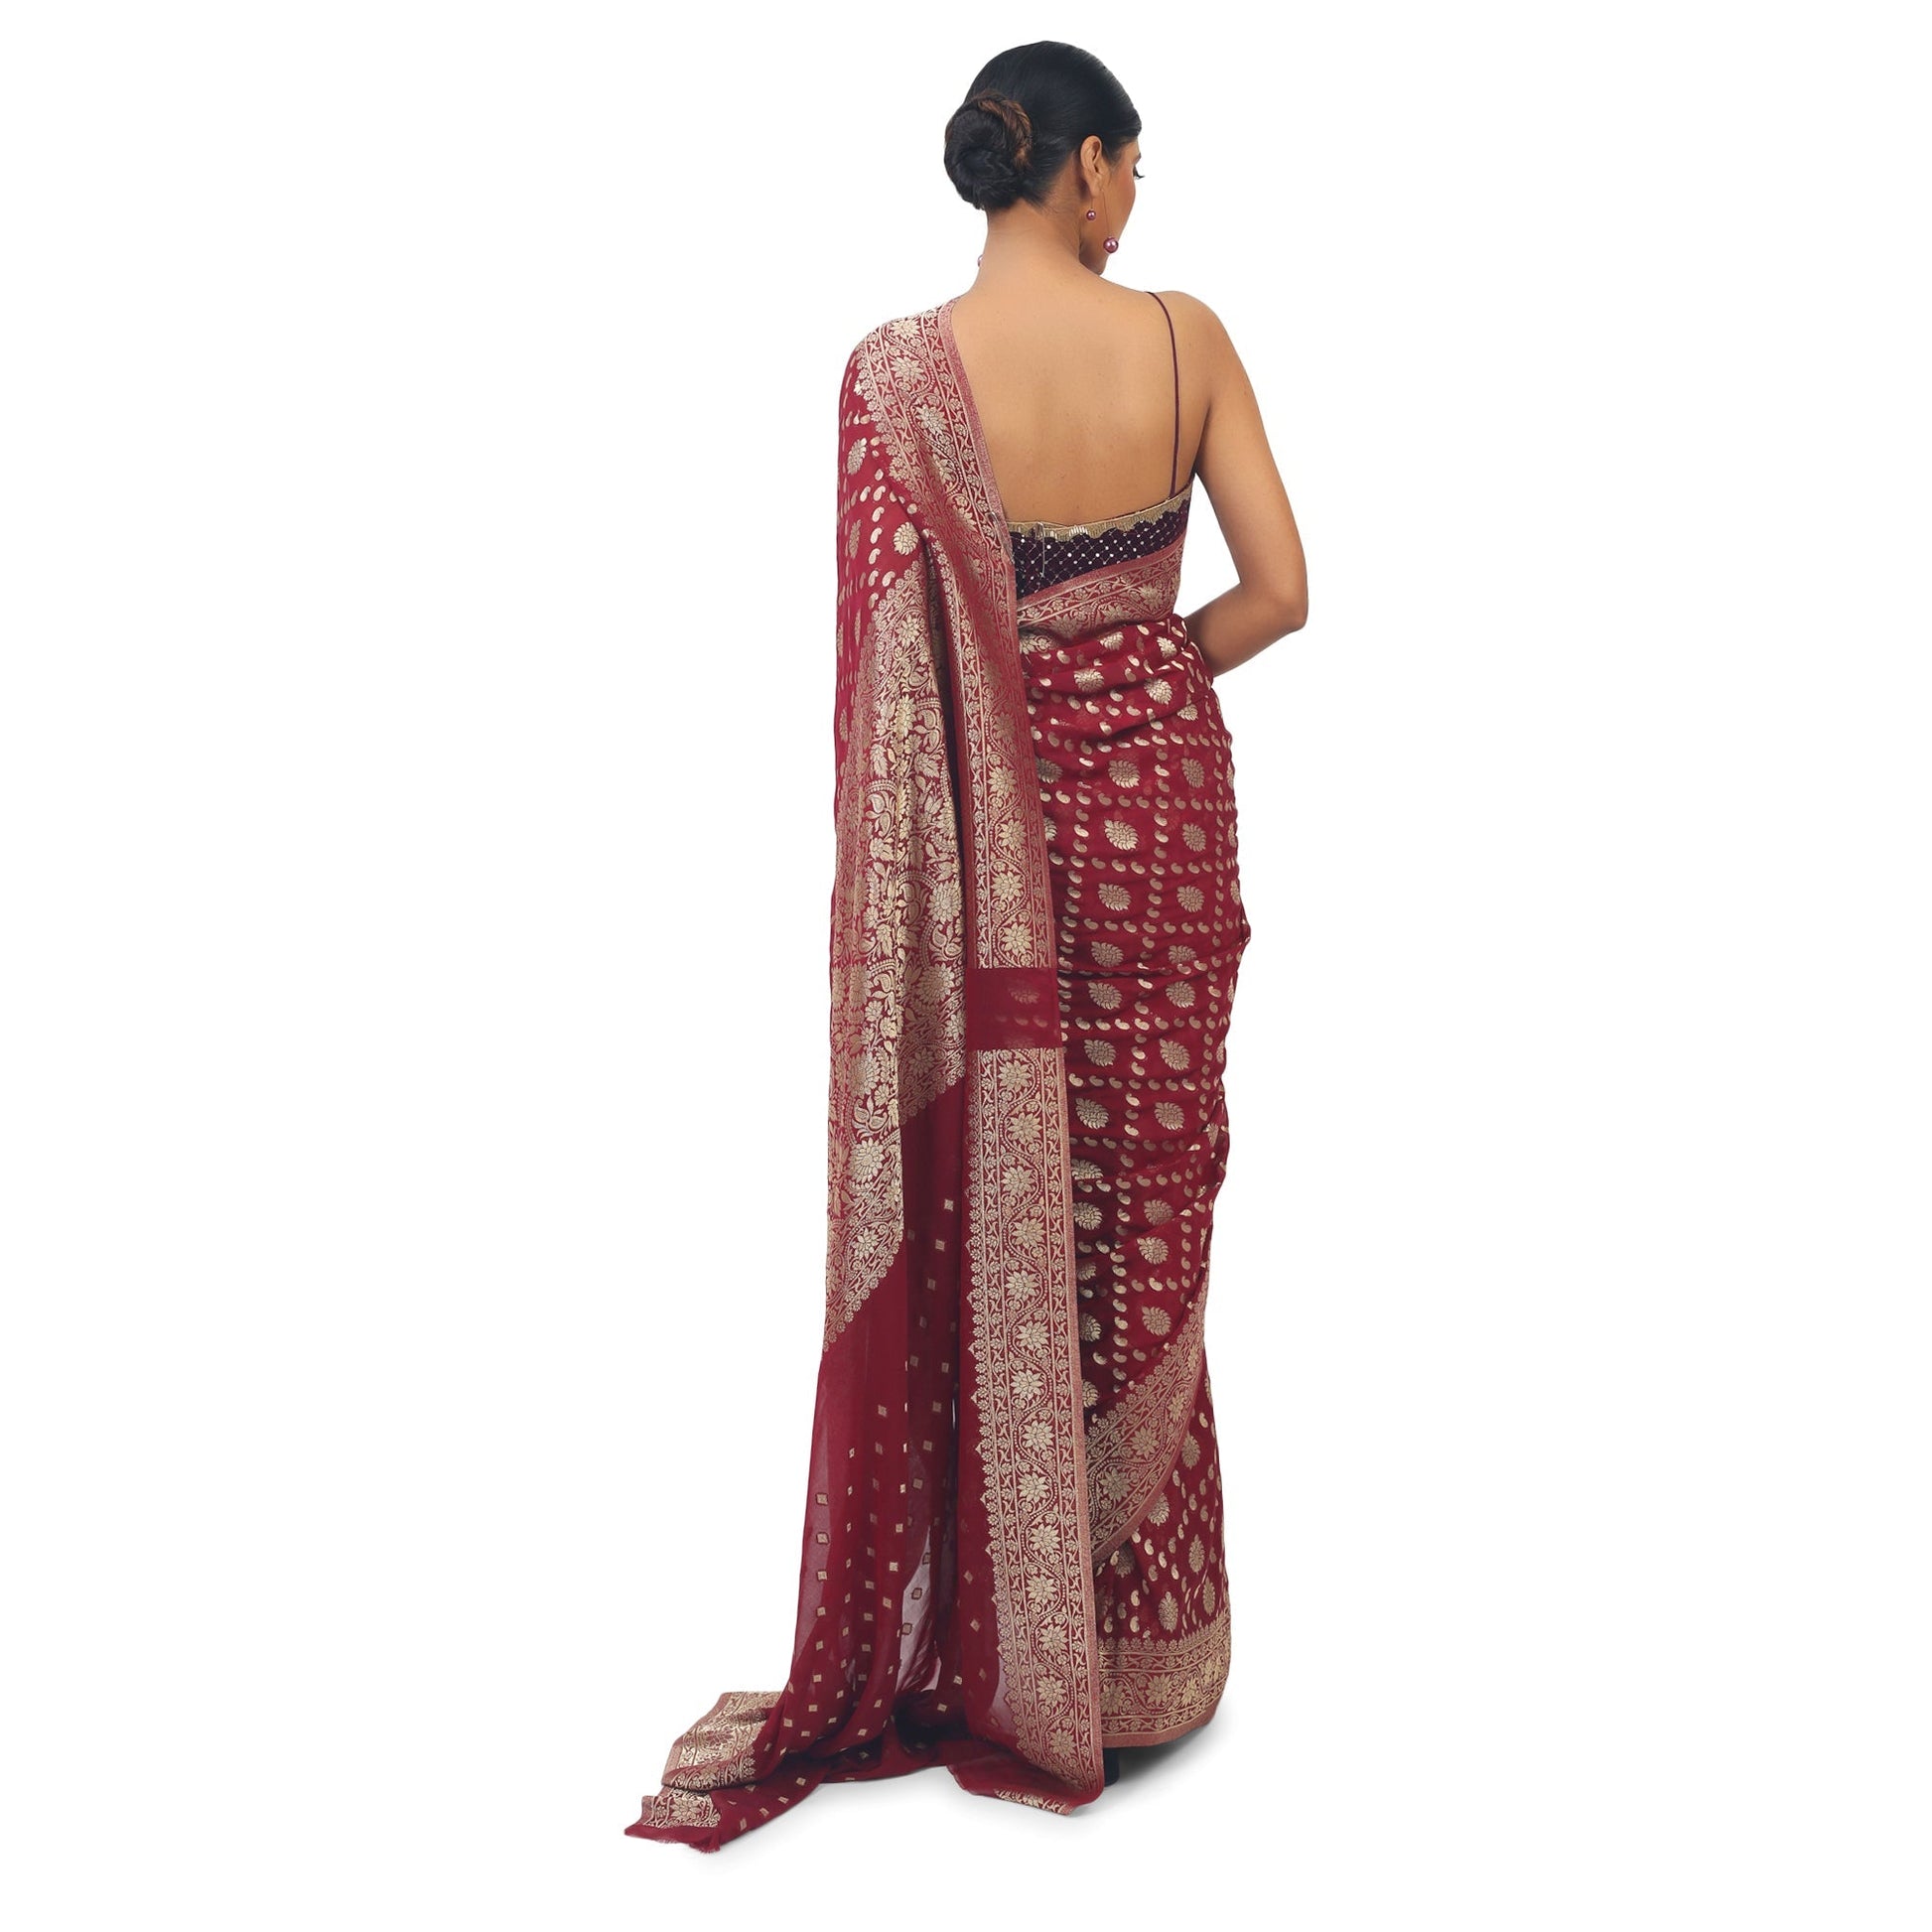 Maroon soft Georgette Banarsi Saree With golden work boarder Apparel & Accessories 50%off Cocktail Festive maroon Saree Soft Georgette wine thehangrmaroon-soft-georgette-banarsi-saree-with-golden-work-boarderthehangr-106987